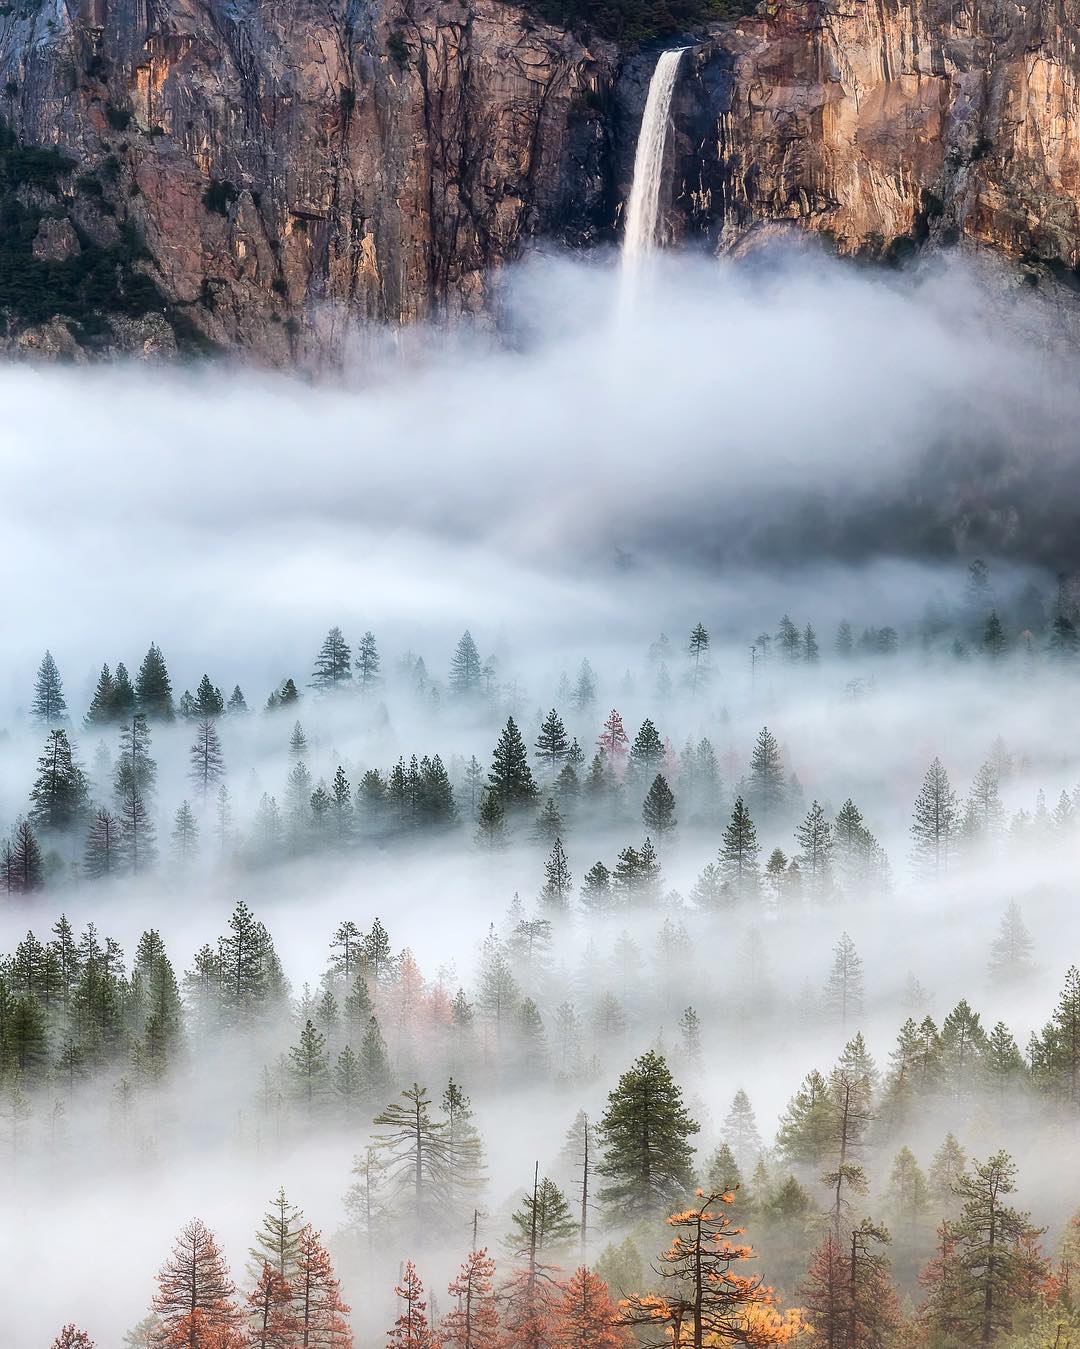 Top 7 National Parks in the USA - Yosemite